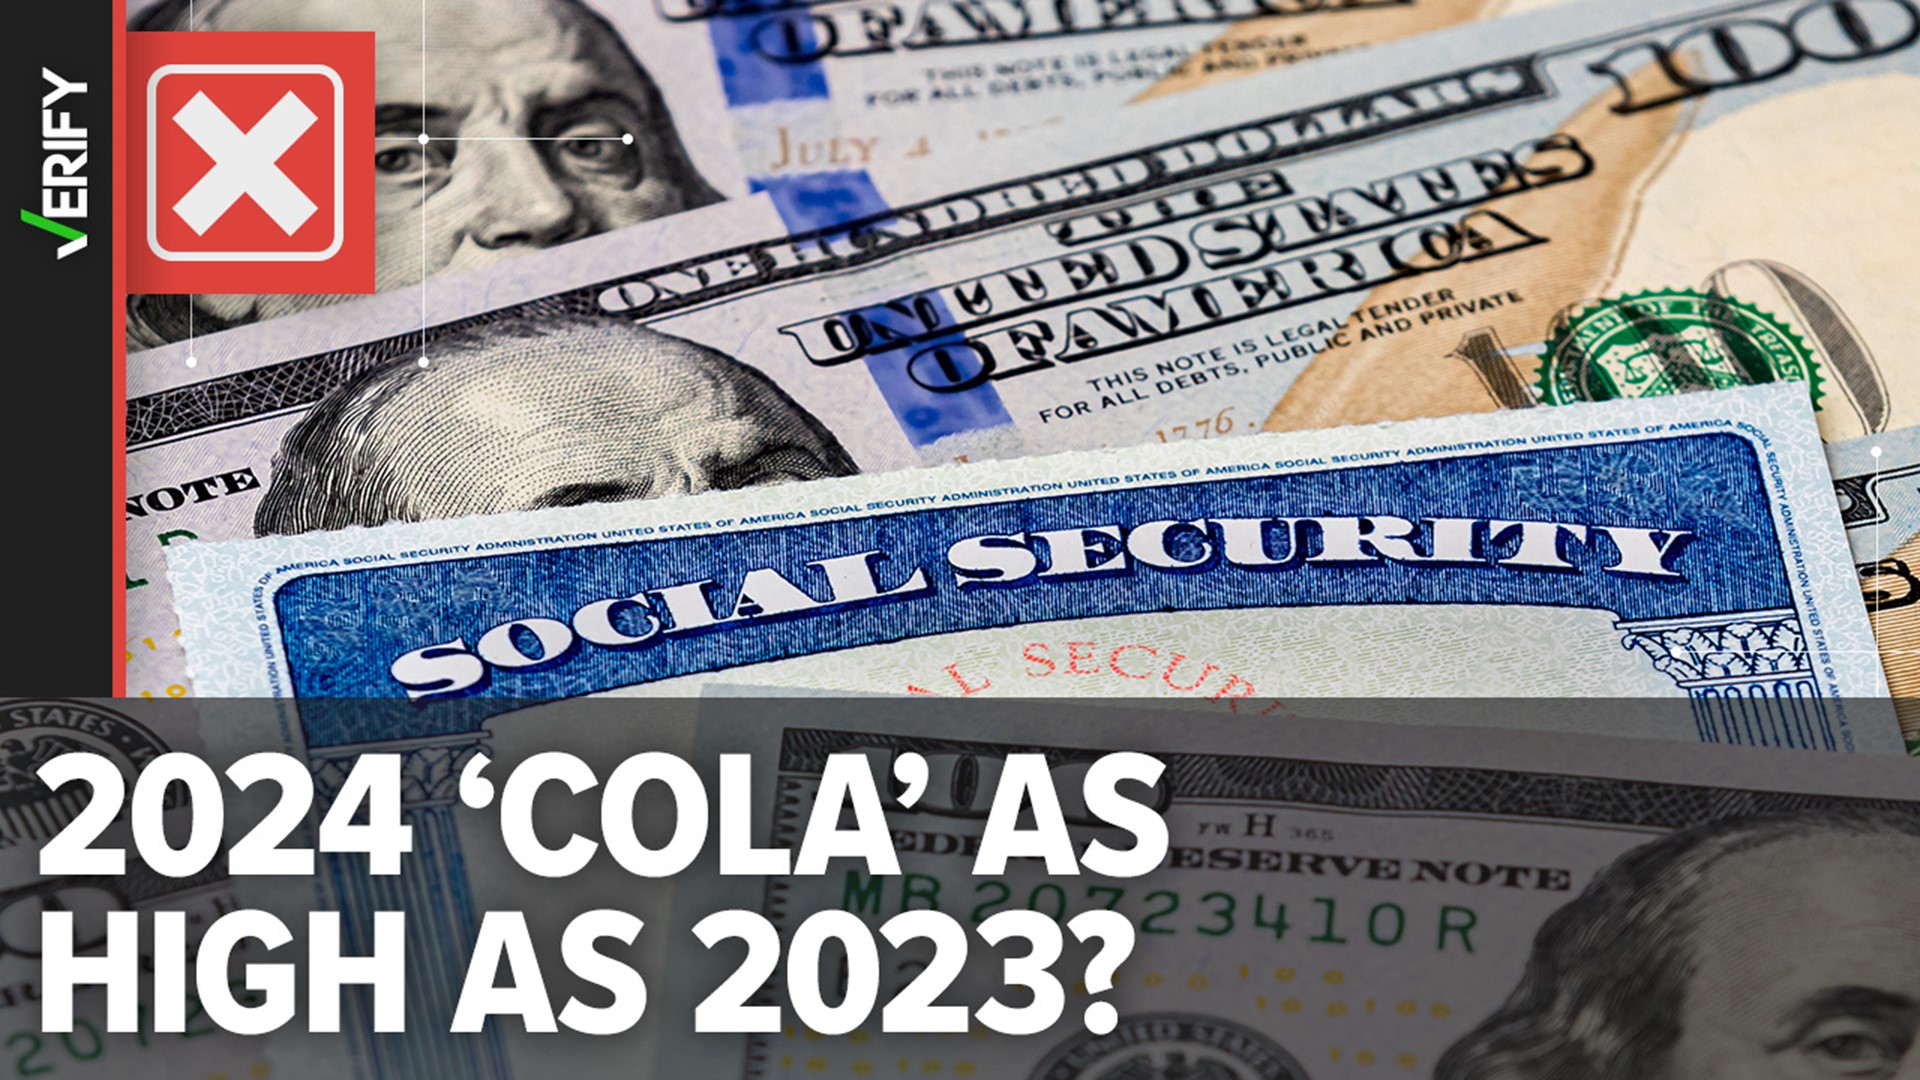 Experts predict that Social Security’s cost-of-living adjustment (COLA) will be about 3% in 2024. That’s less than half of the previous year’s COLA increase.